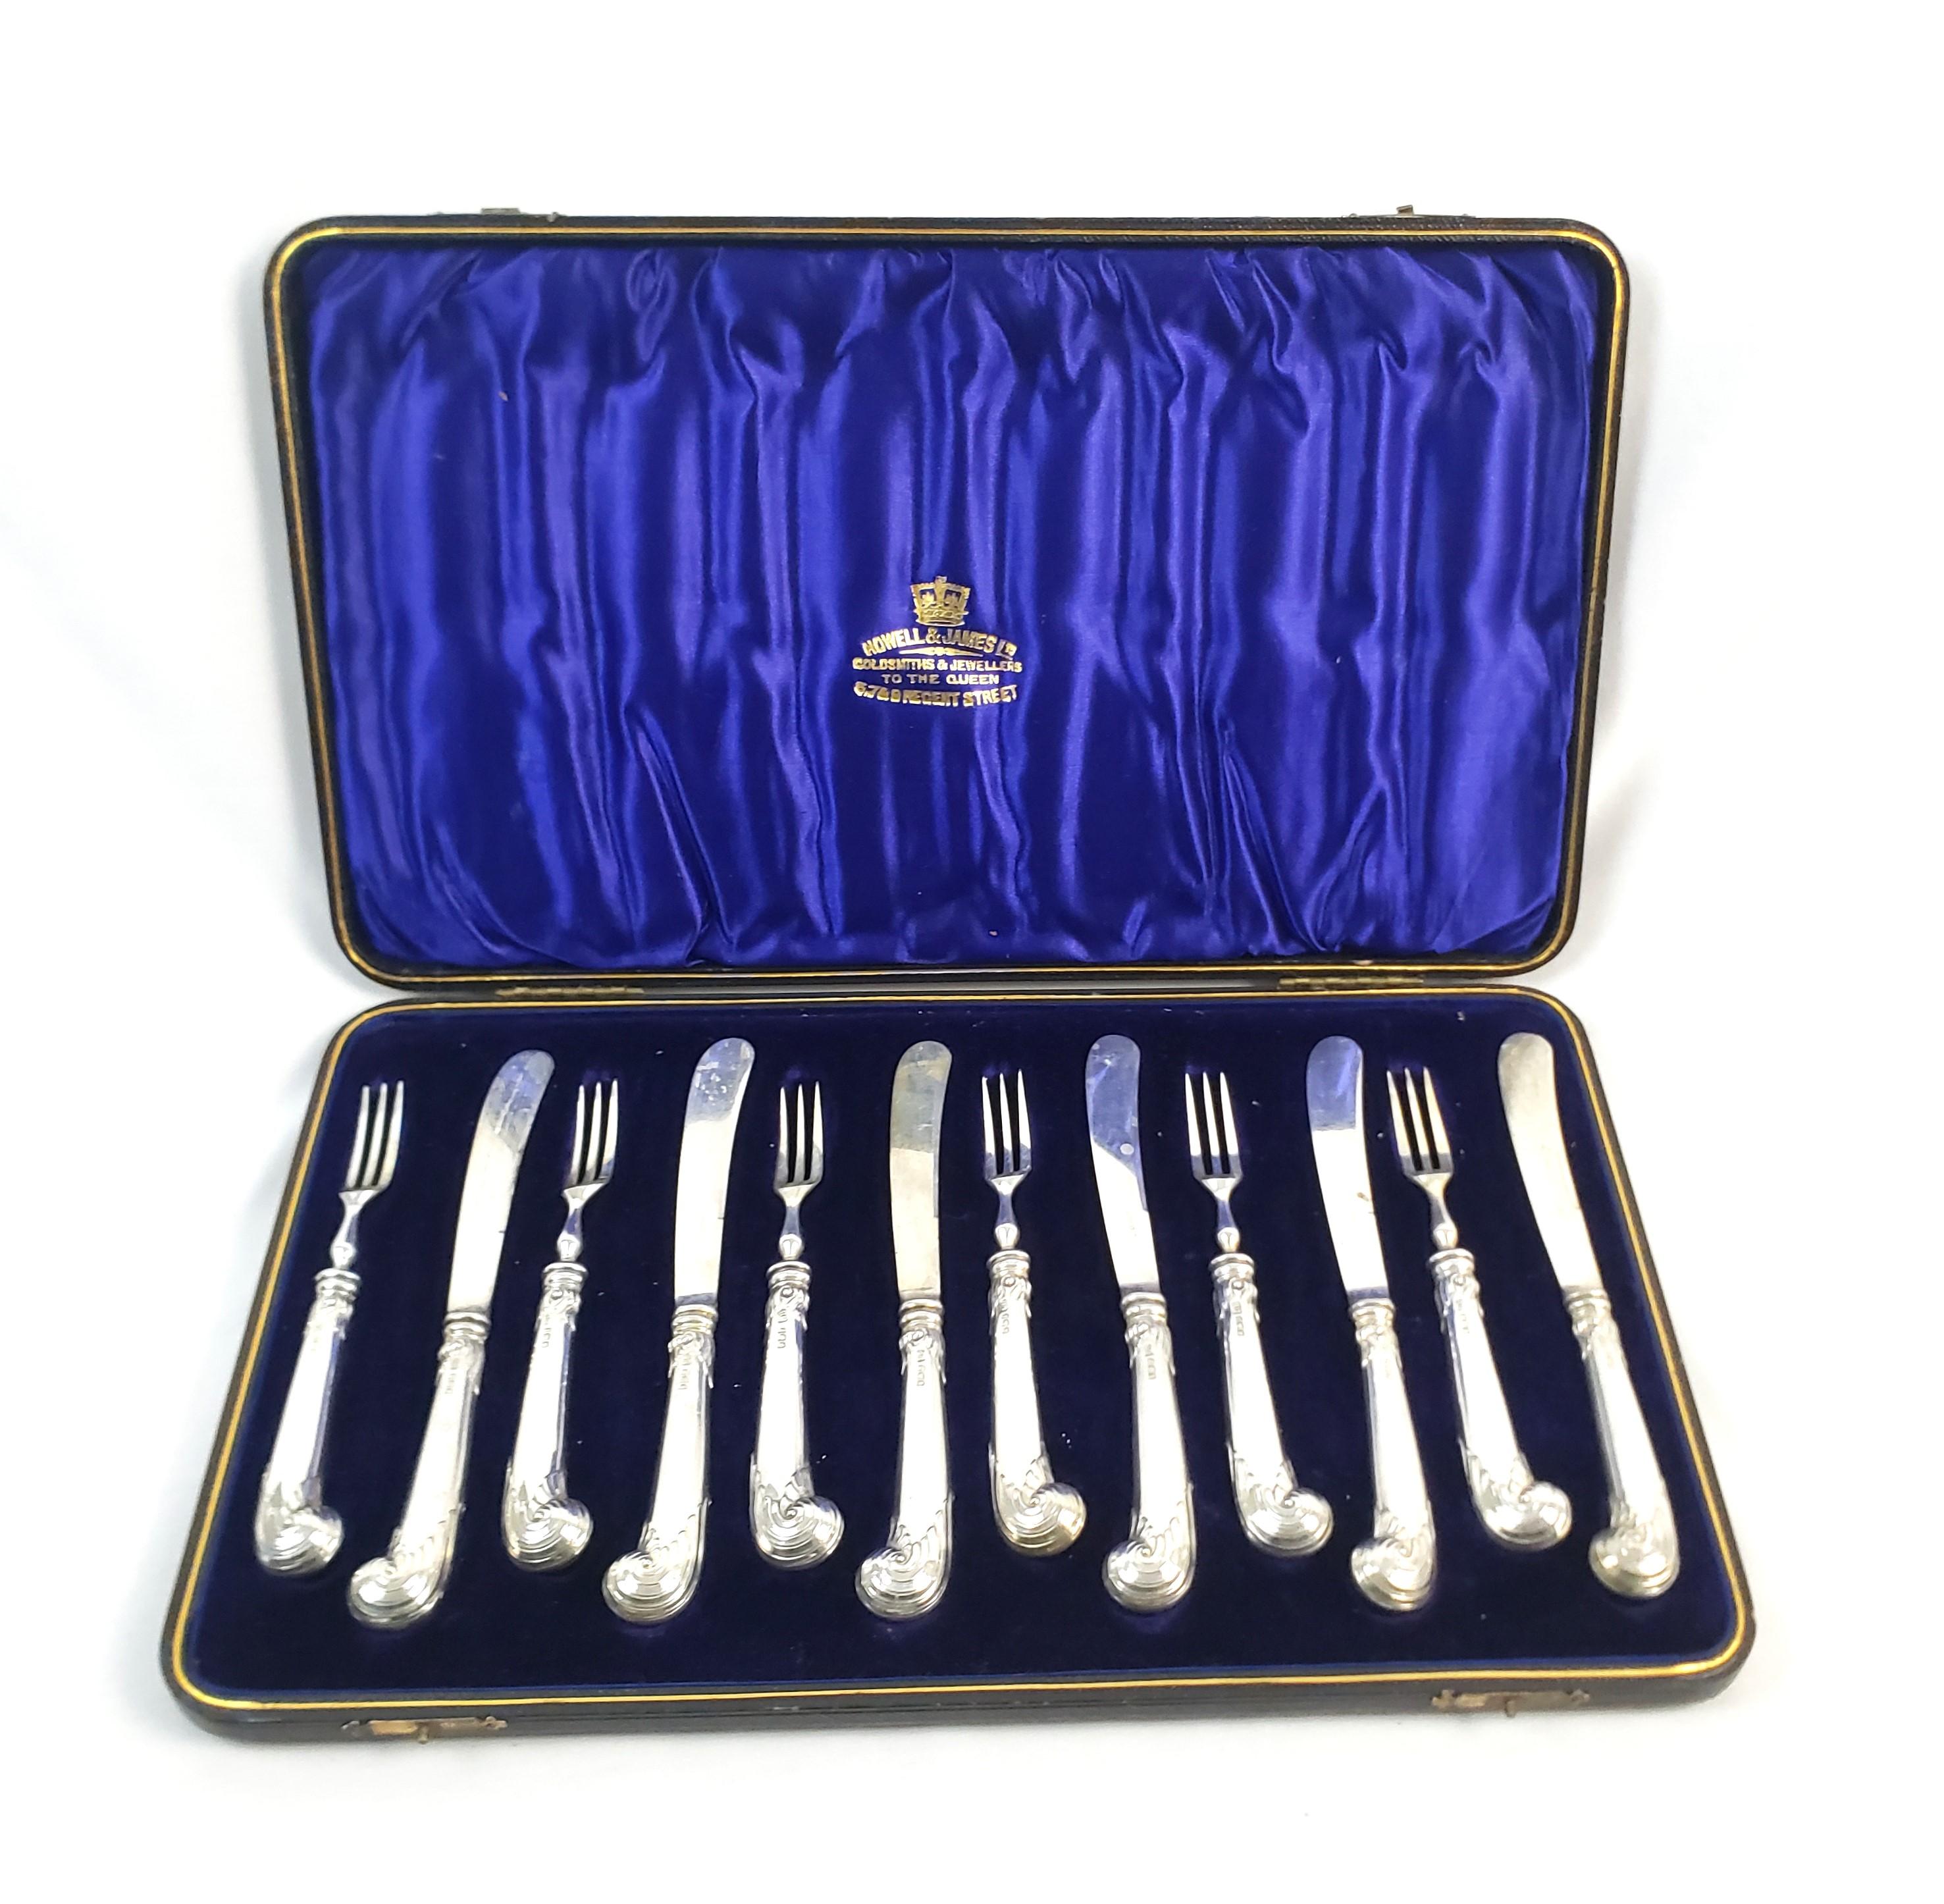 This antique sterling silver boxed desert knife and fork set is hallmarked by an unknown maker, but originated from England and dates to approximately 1910 and  done in the period Edwarian style. The handles of the set are composed of sterling